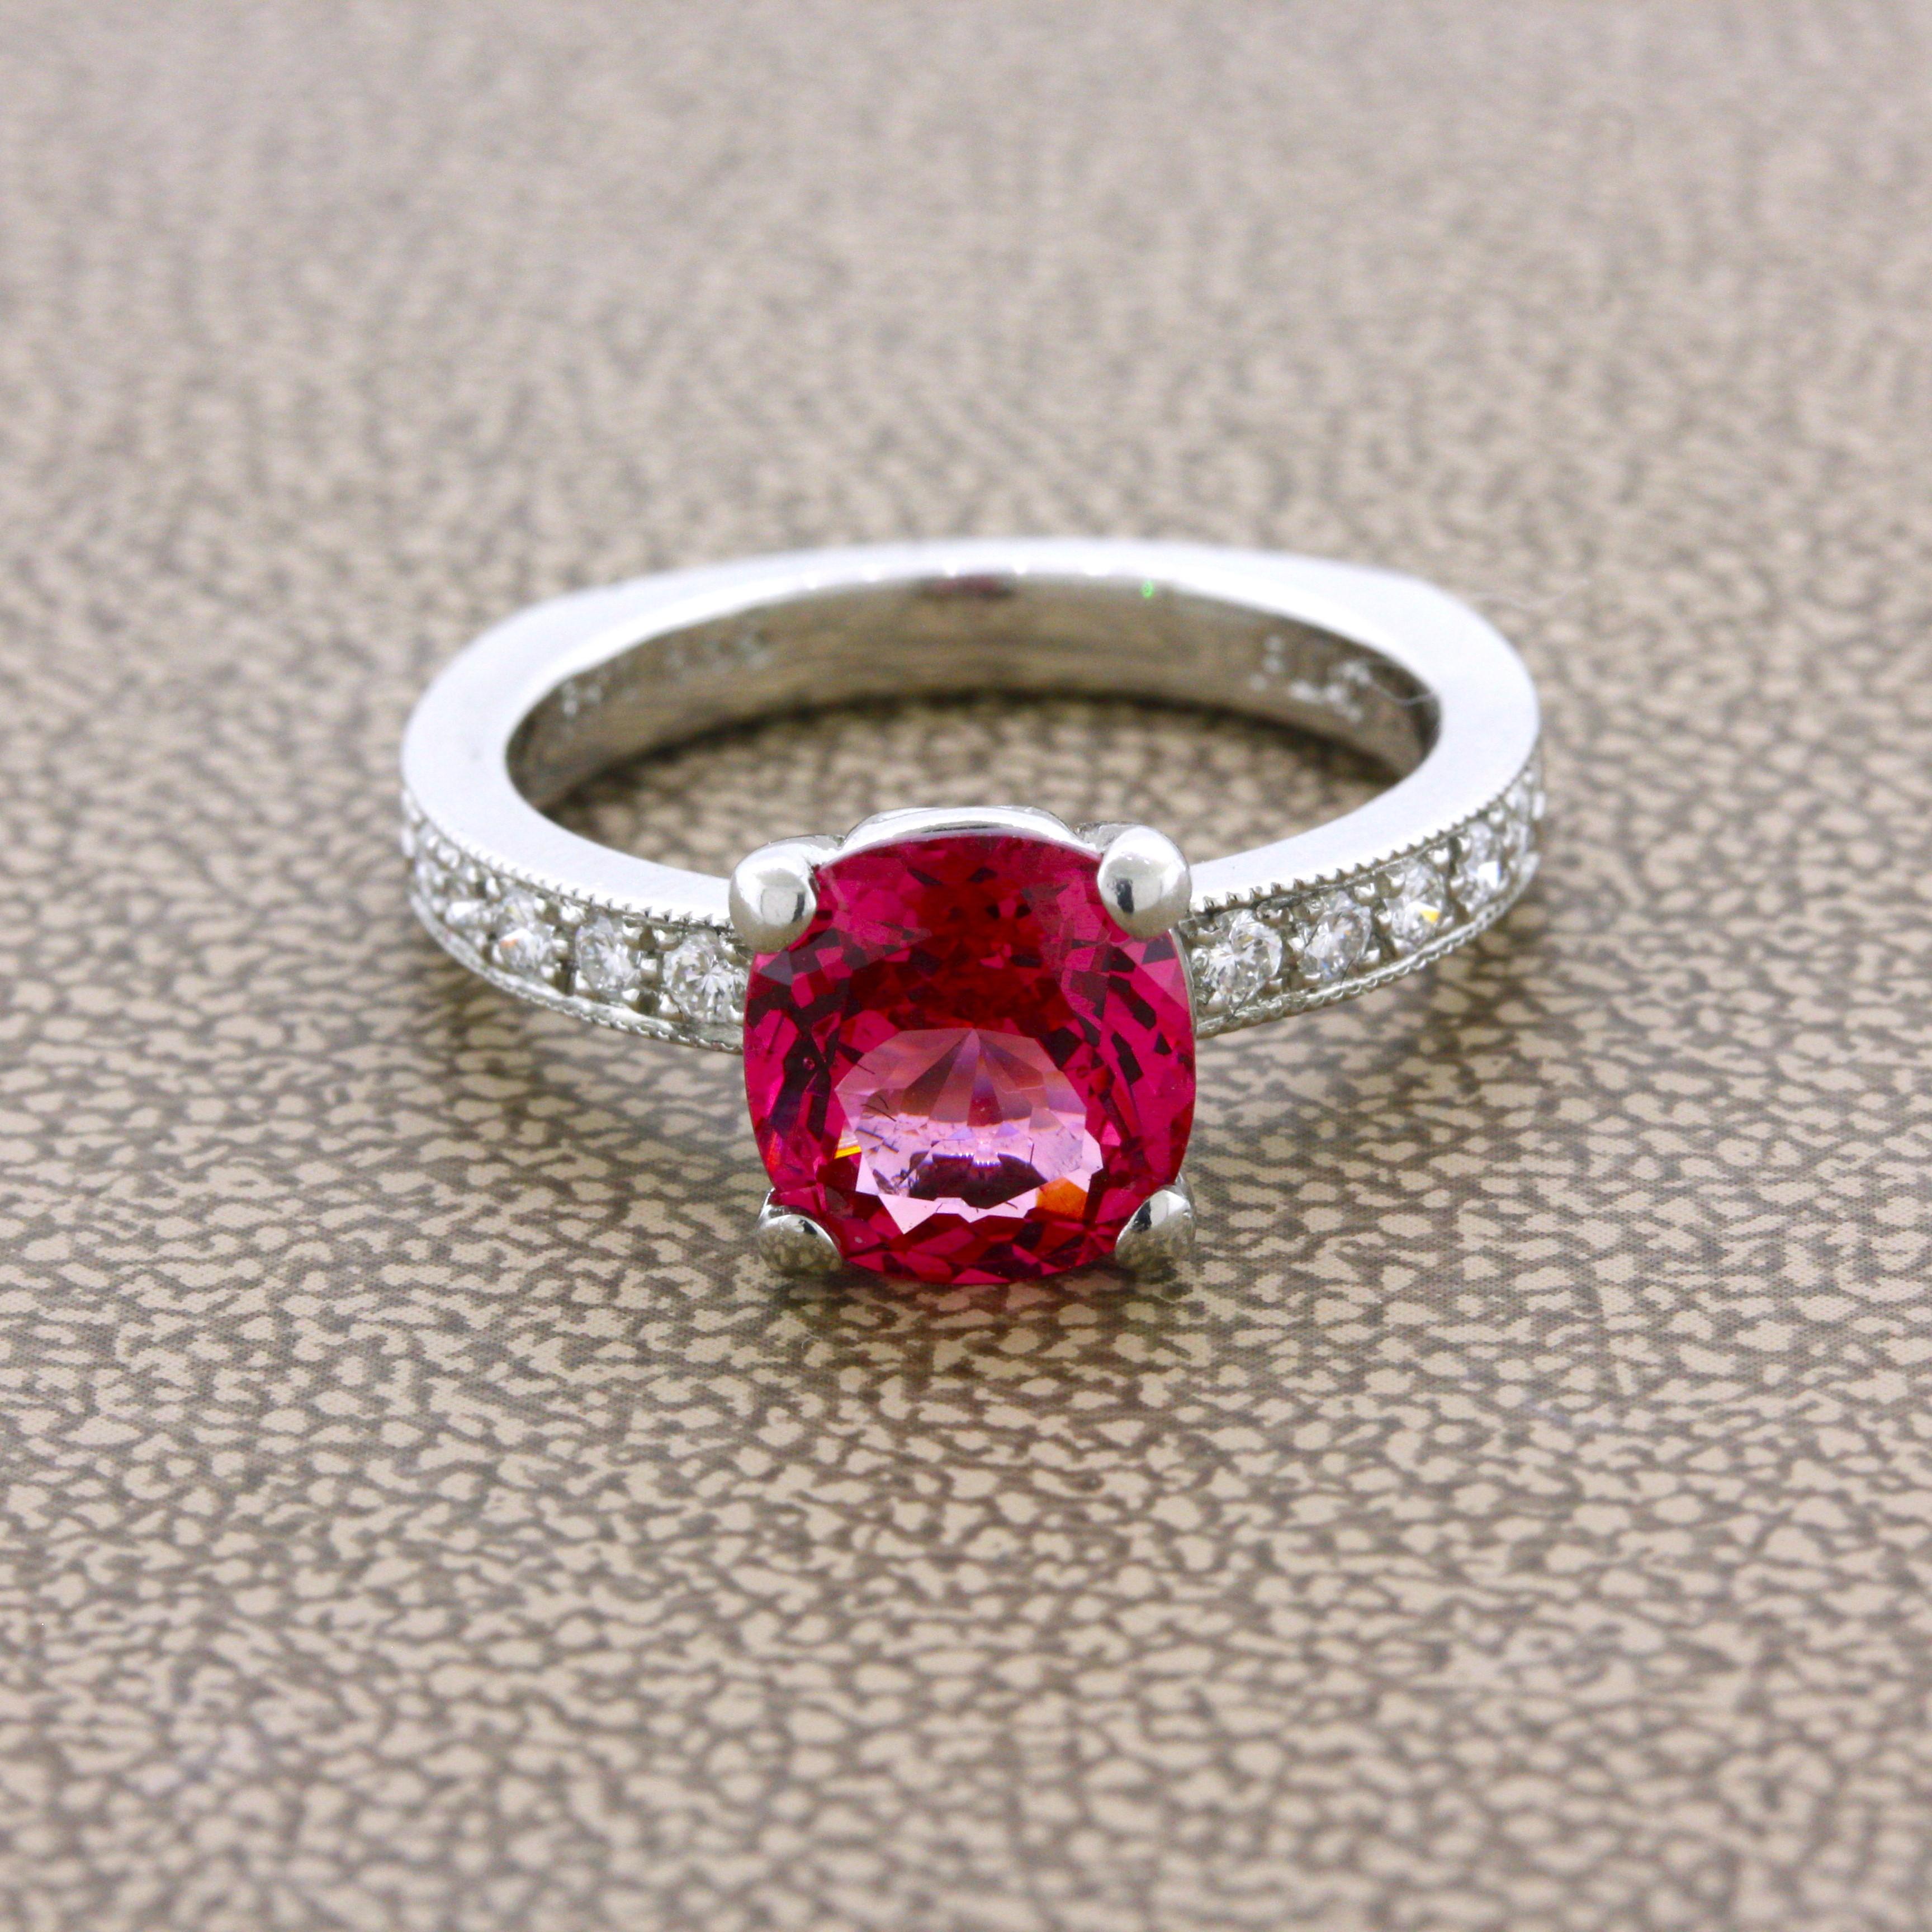 A fine gem spinel weighing 2.11 carats takes center stage! It has a bright intense red-pink color that is full of sparkle and brilliance. It is certified by the GIA as natural with no treatment and coming from Tanzania which is a strong source of